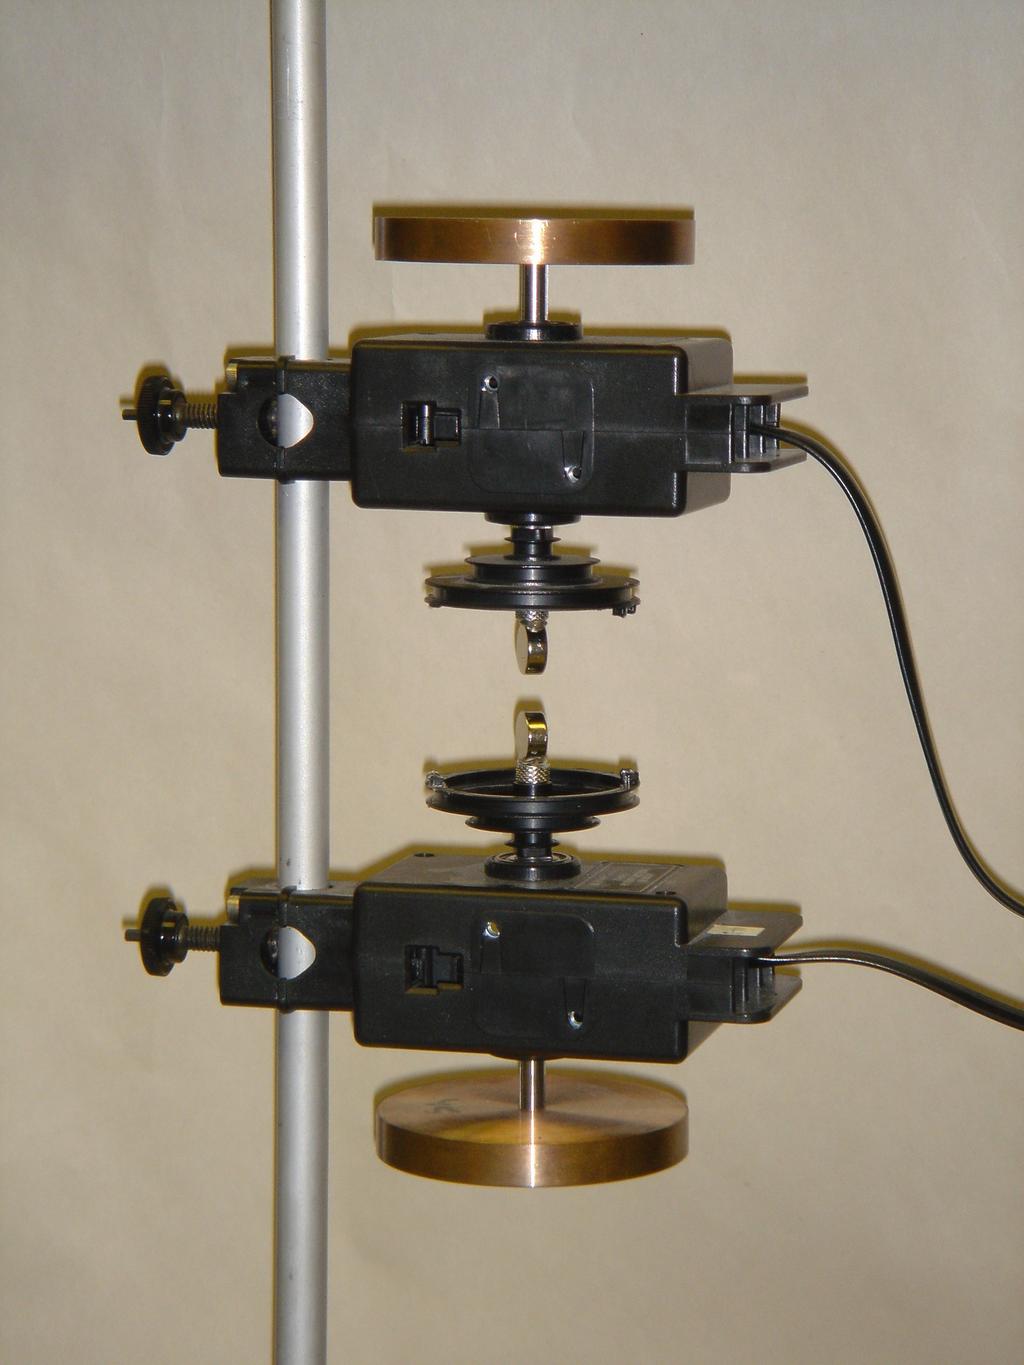 FIG. 2: Apparatus used for experimental observations.